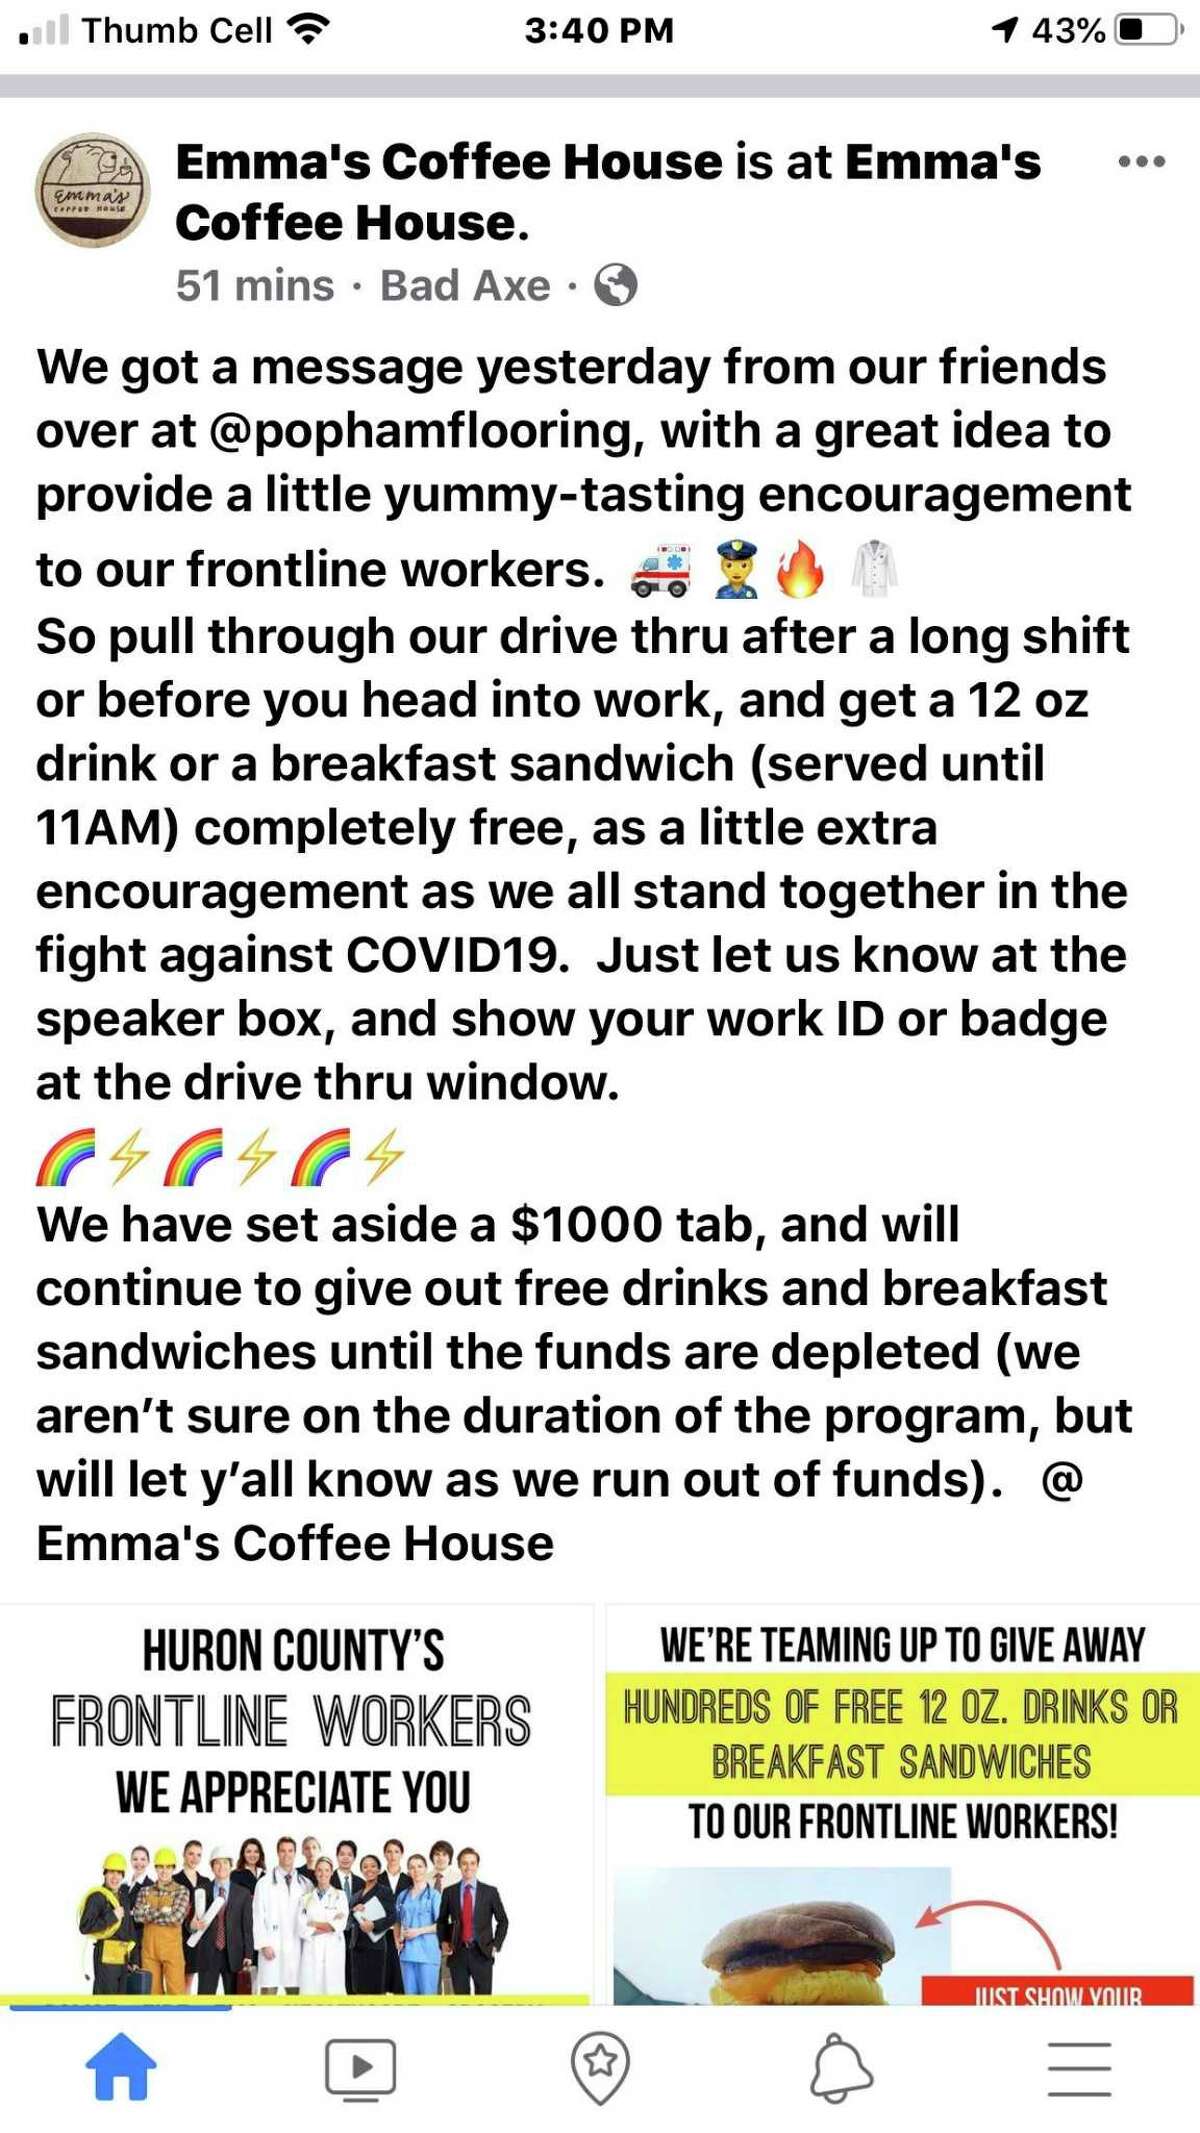 Emma's Coffee House and Popham Flooring team up to offer front-line employees free breakfast options. (Courtesy/Emma's Coffee House)